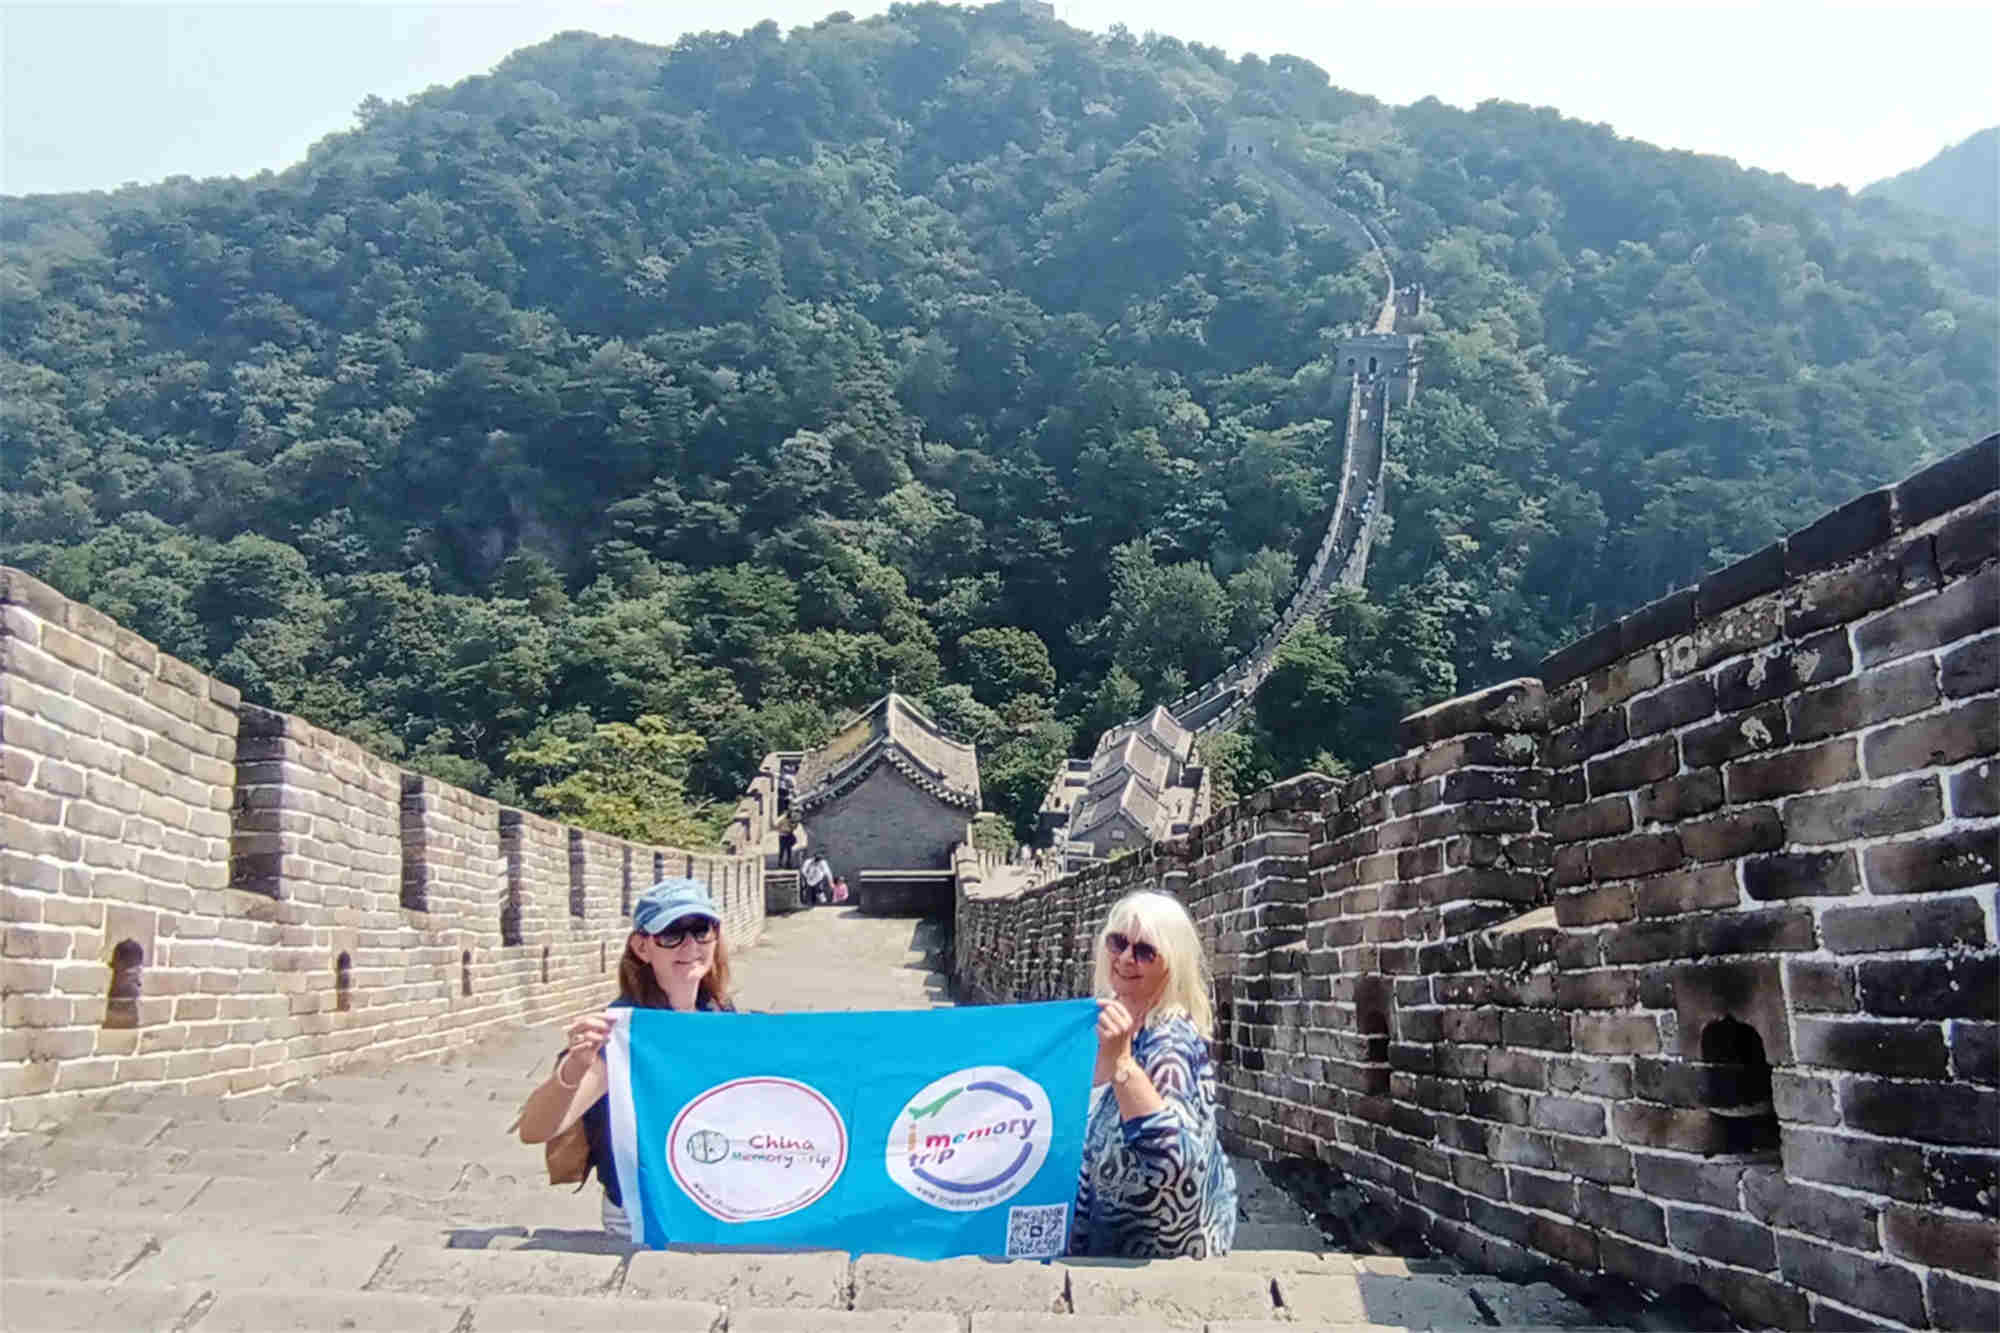 Beijing Private Day Tour to Optional Badaling Great Wall or Mutianyu Great Wall + National Olympic Park